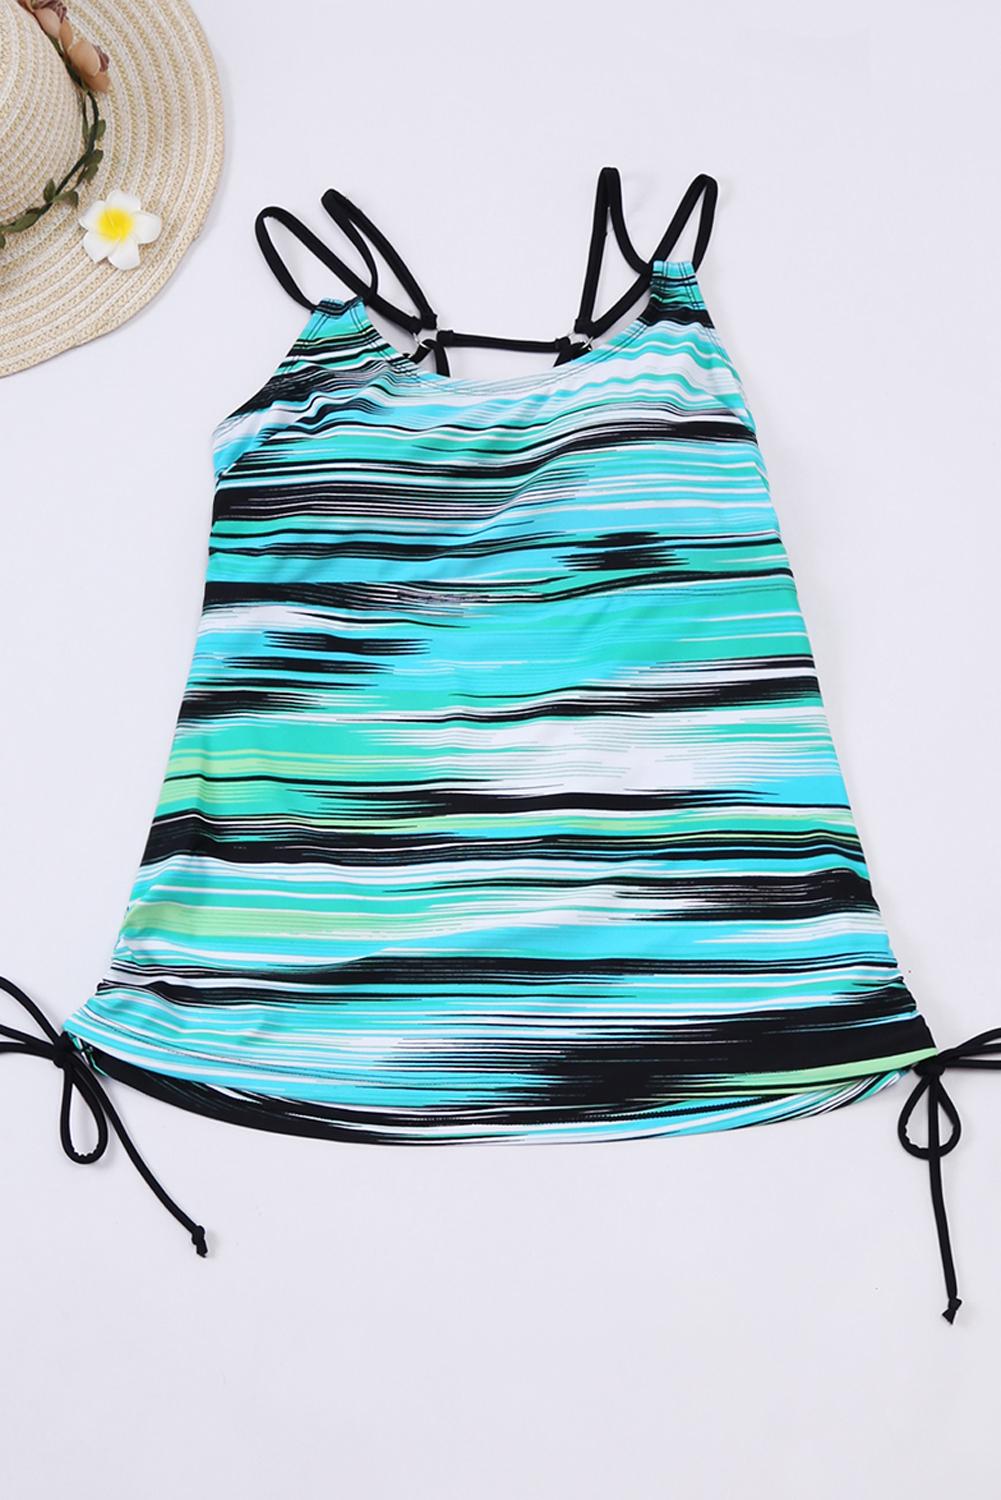 ish Stripes Strappy Tankini Swimsuit Top